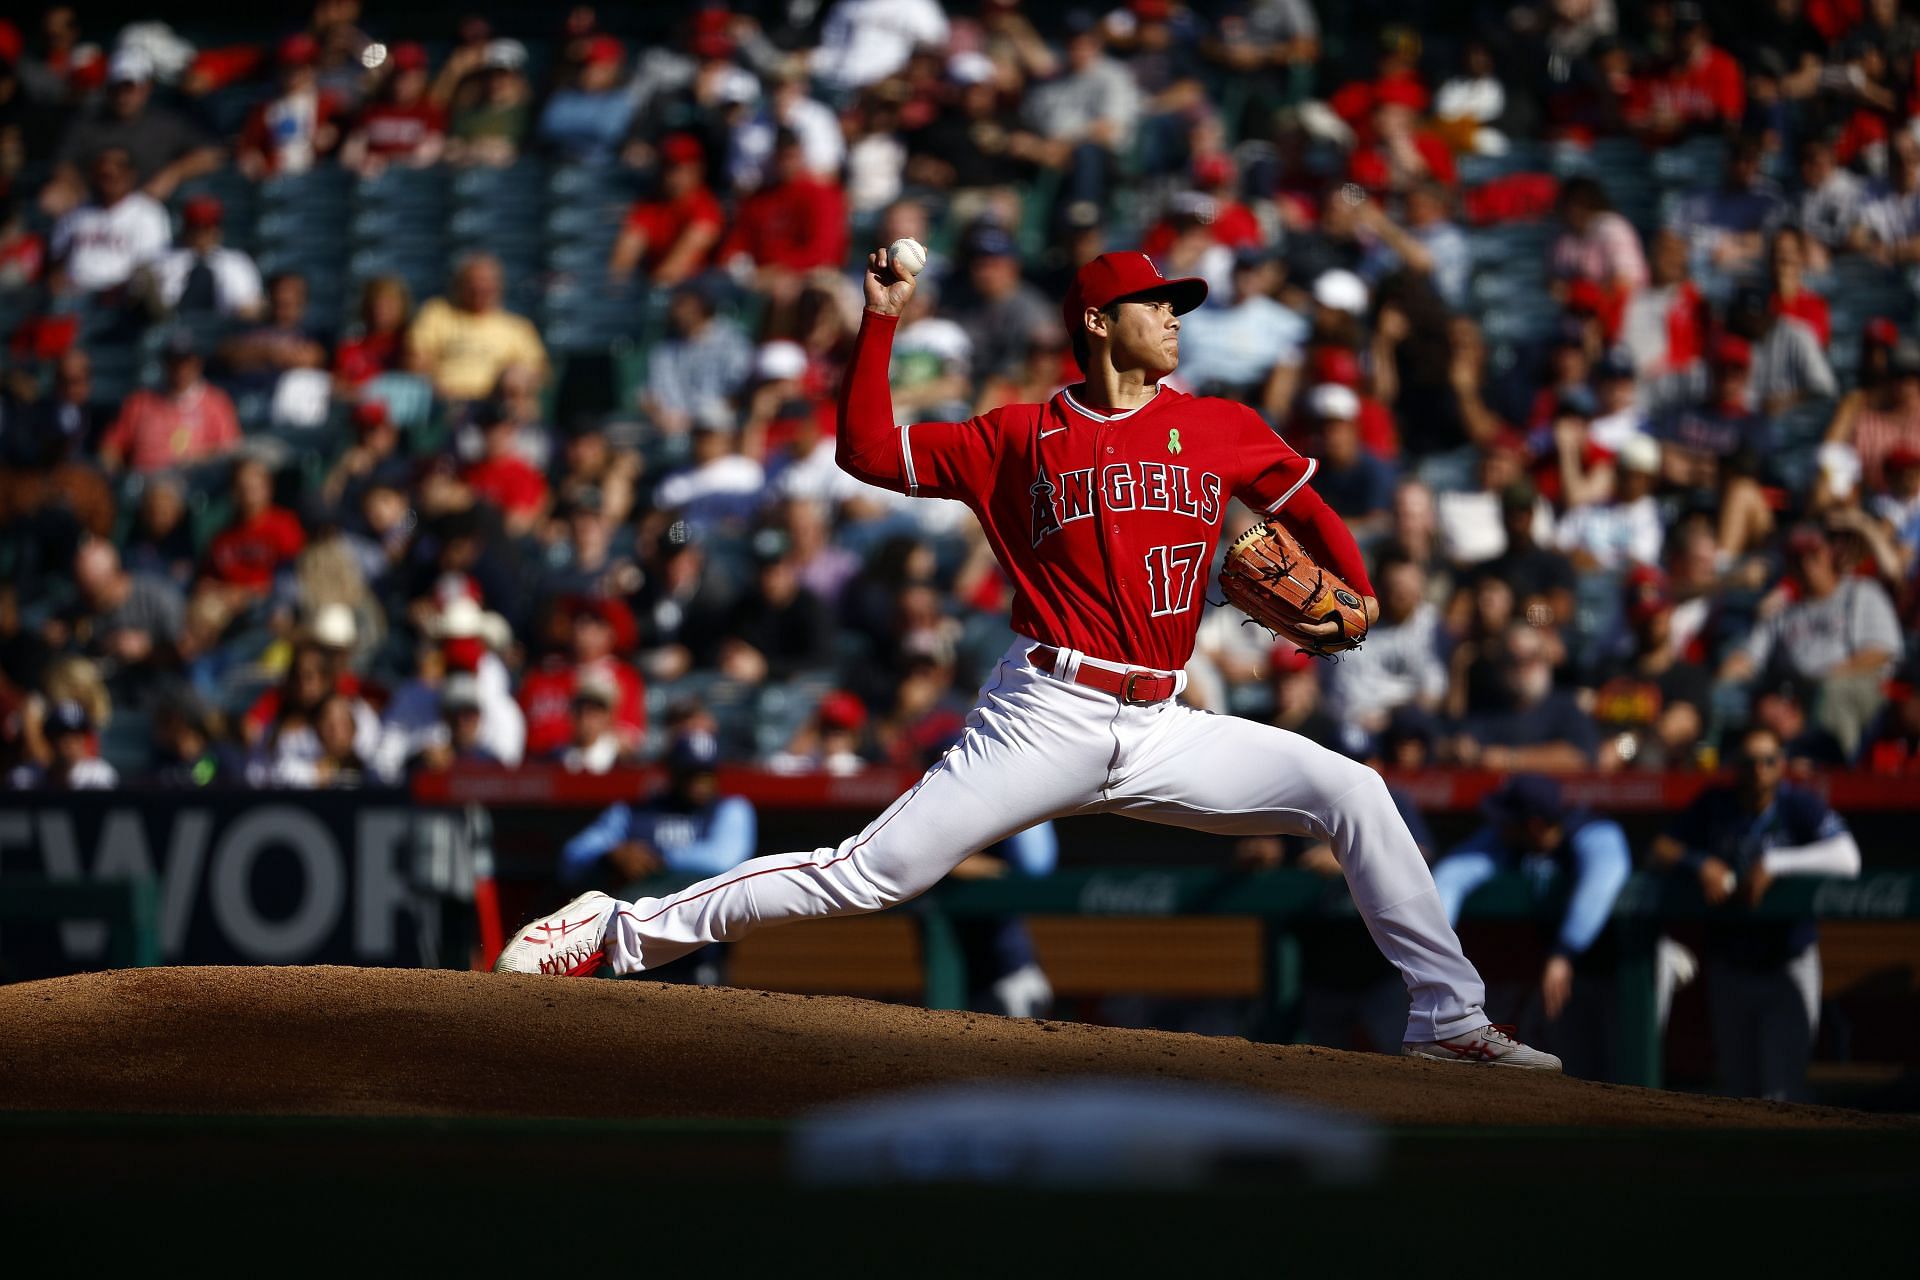 Here's what the stats don't tell you about Shohei Ohtani's 2022 performance